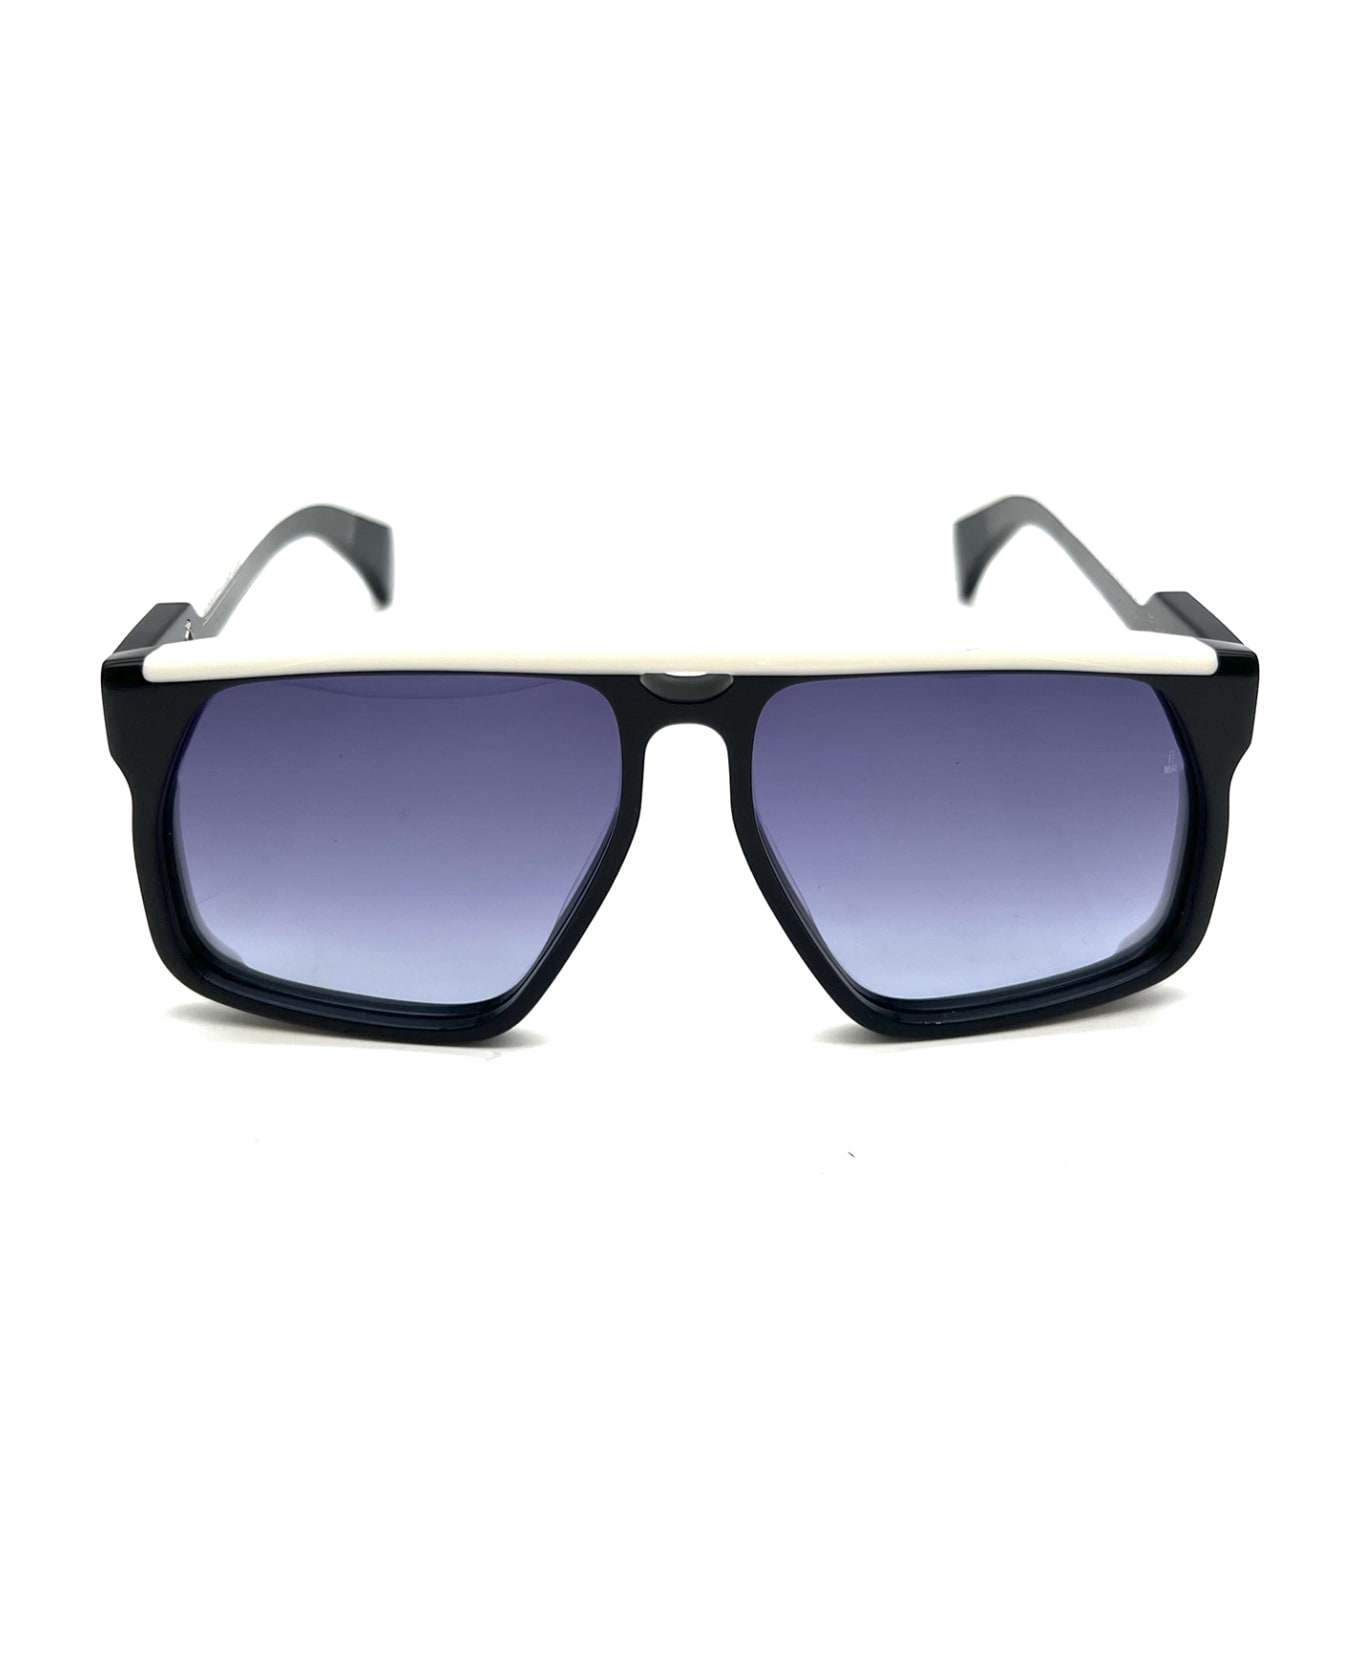 Jacques Marie Mage NEPTURE Sunglasses - O Navy,oxlord サングラス